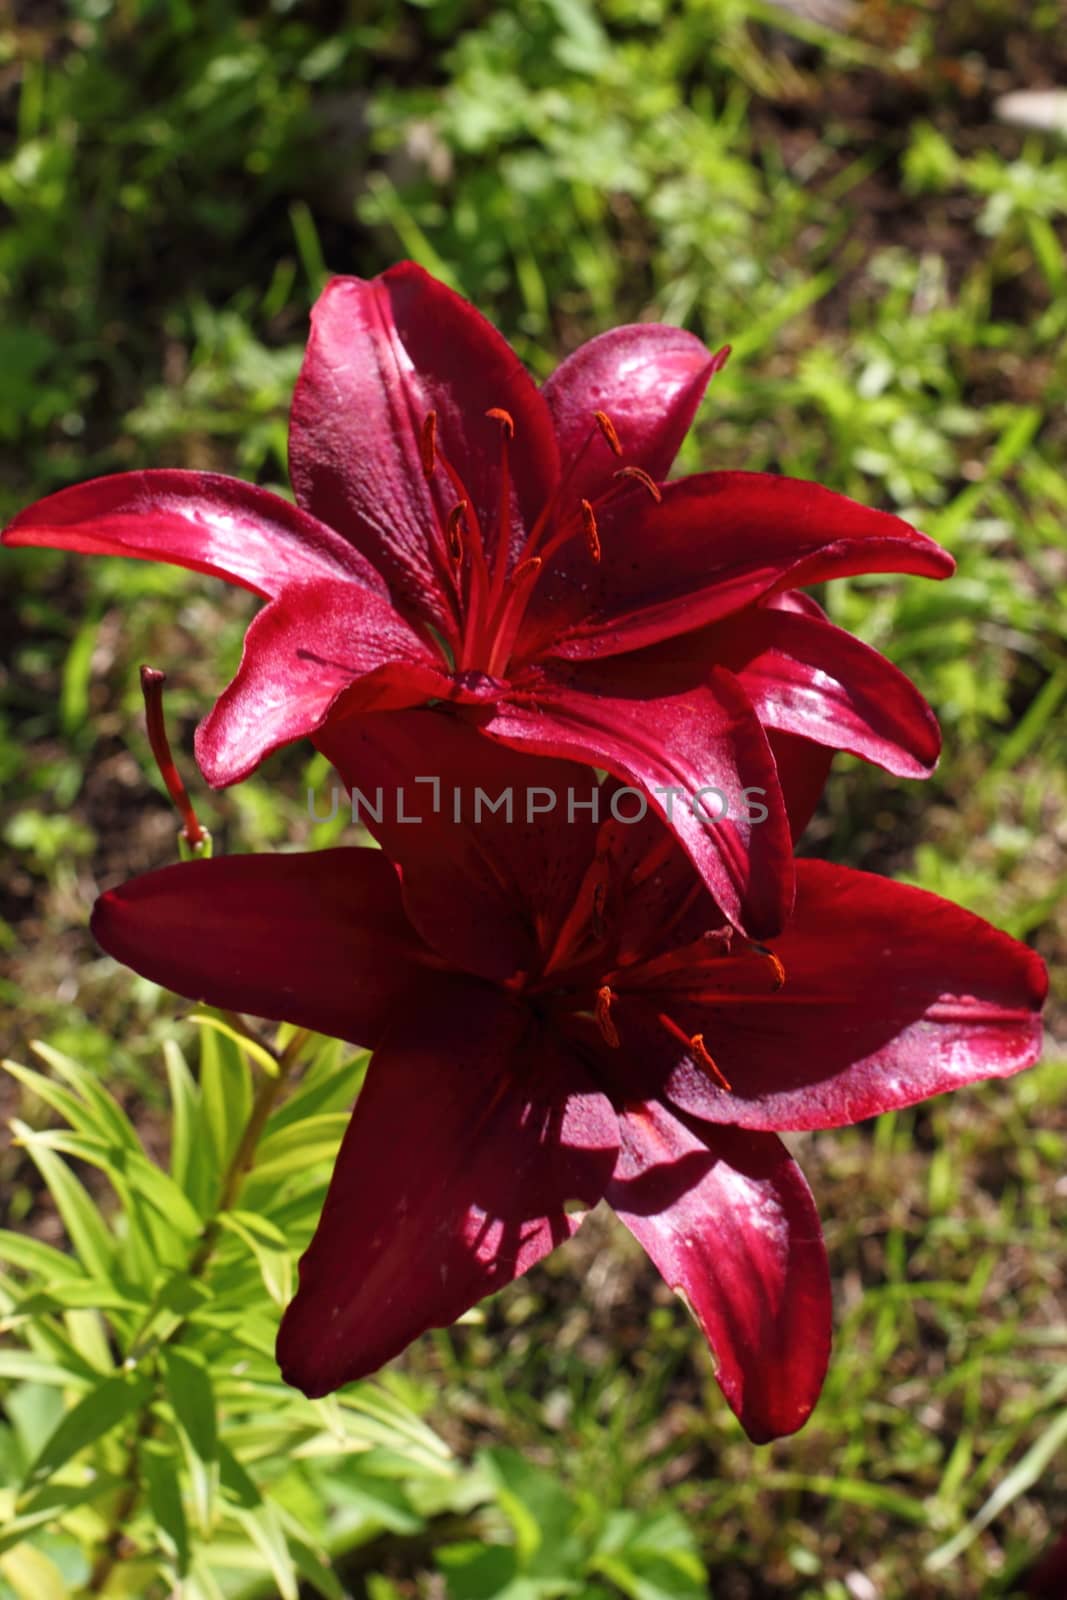 marsala lily in the garden by Metanna